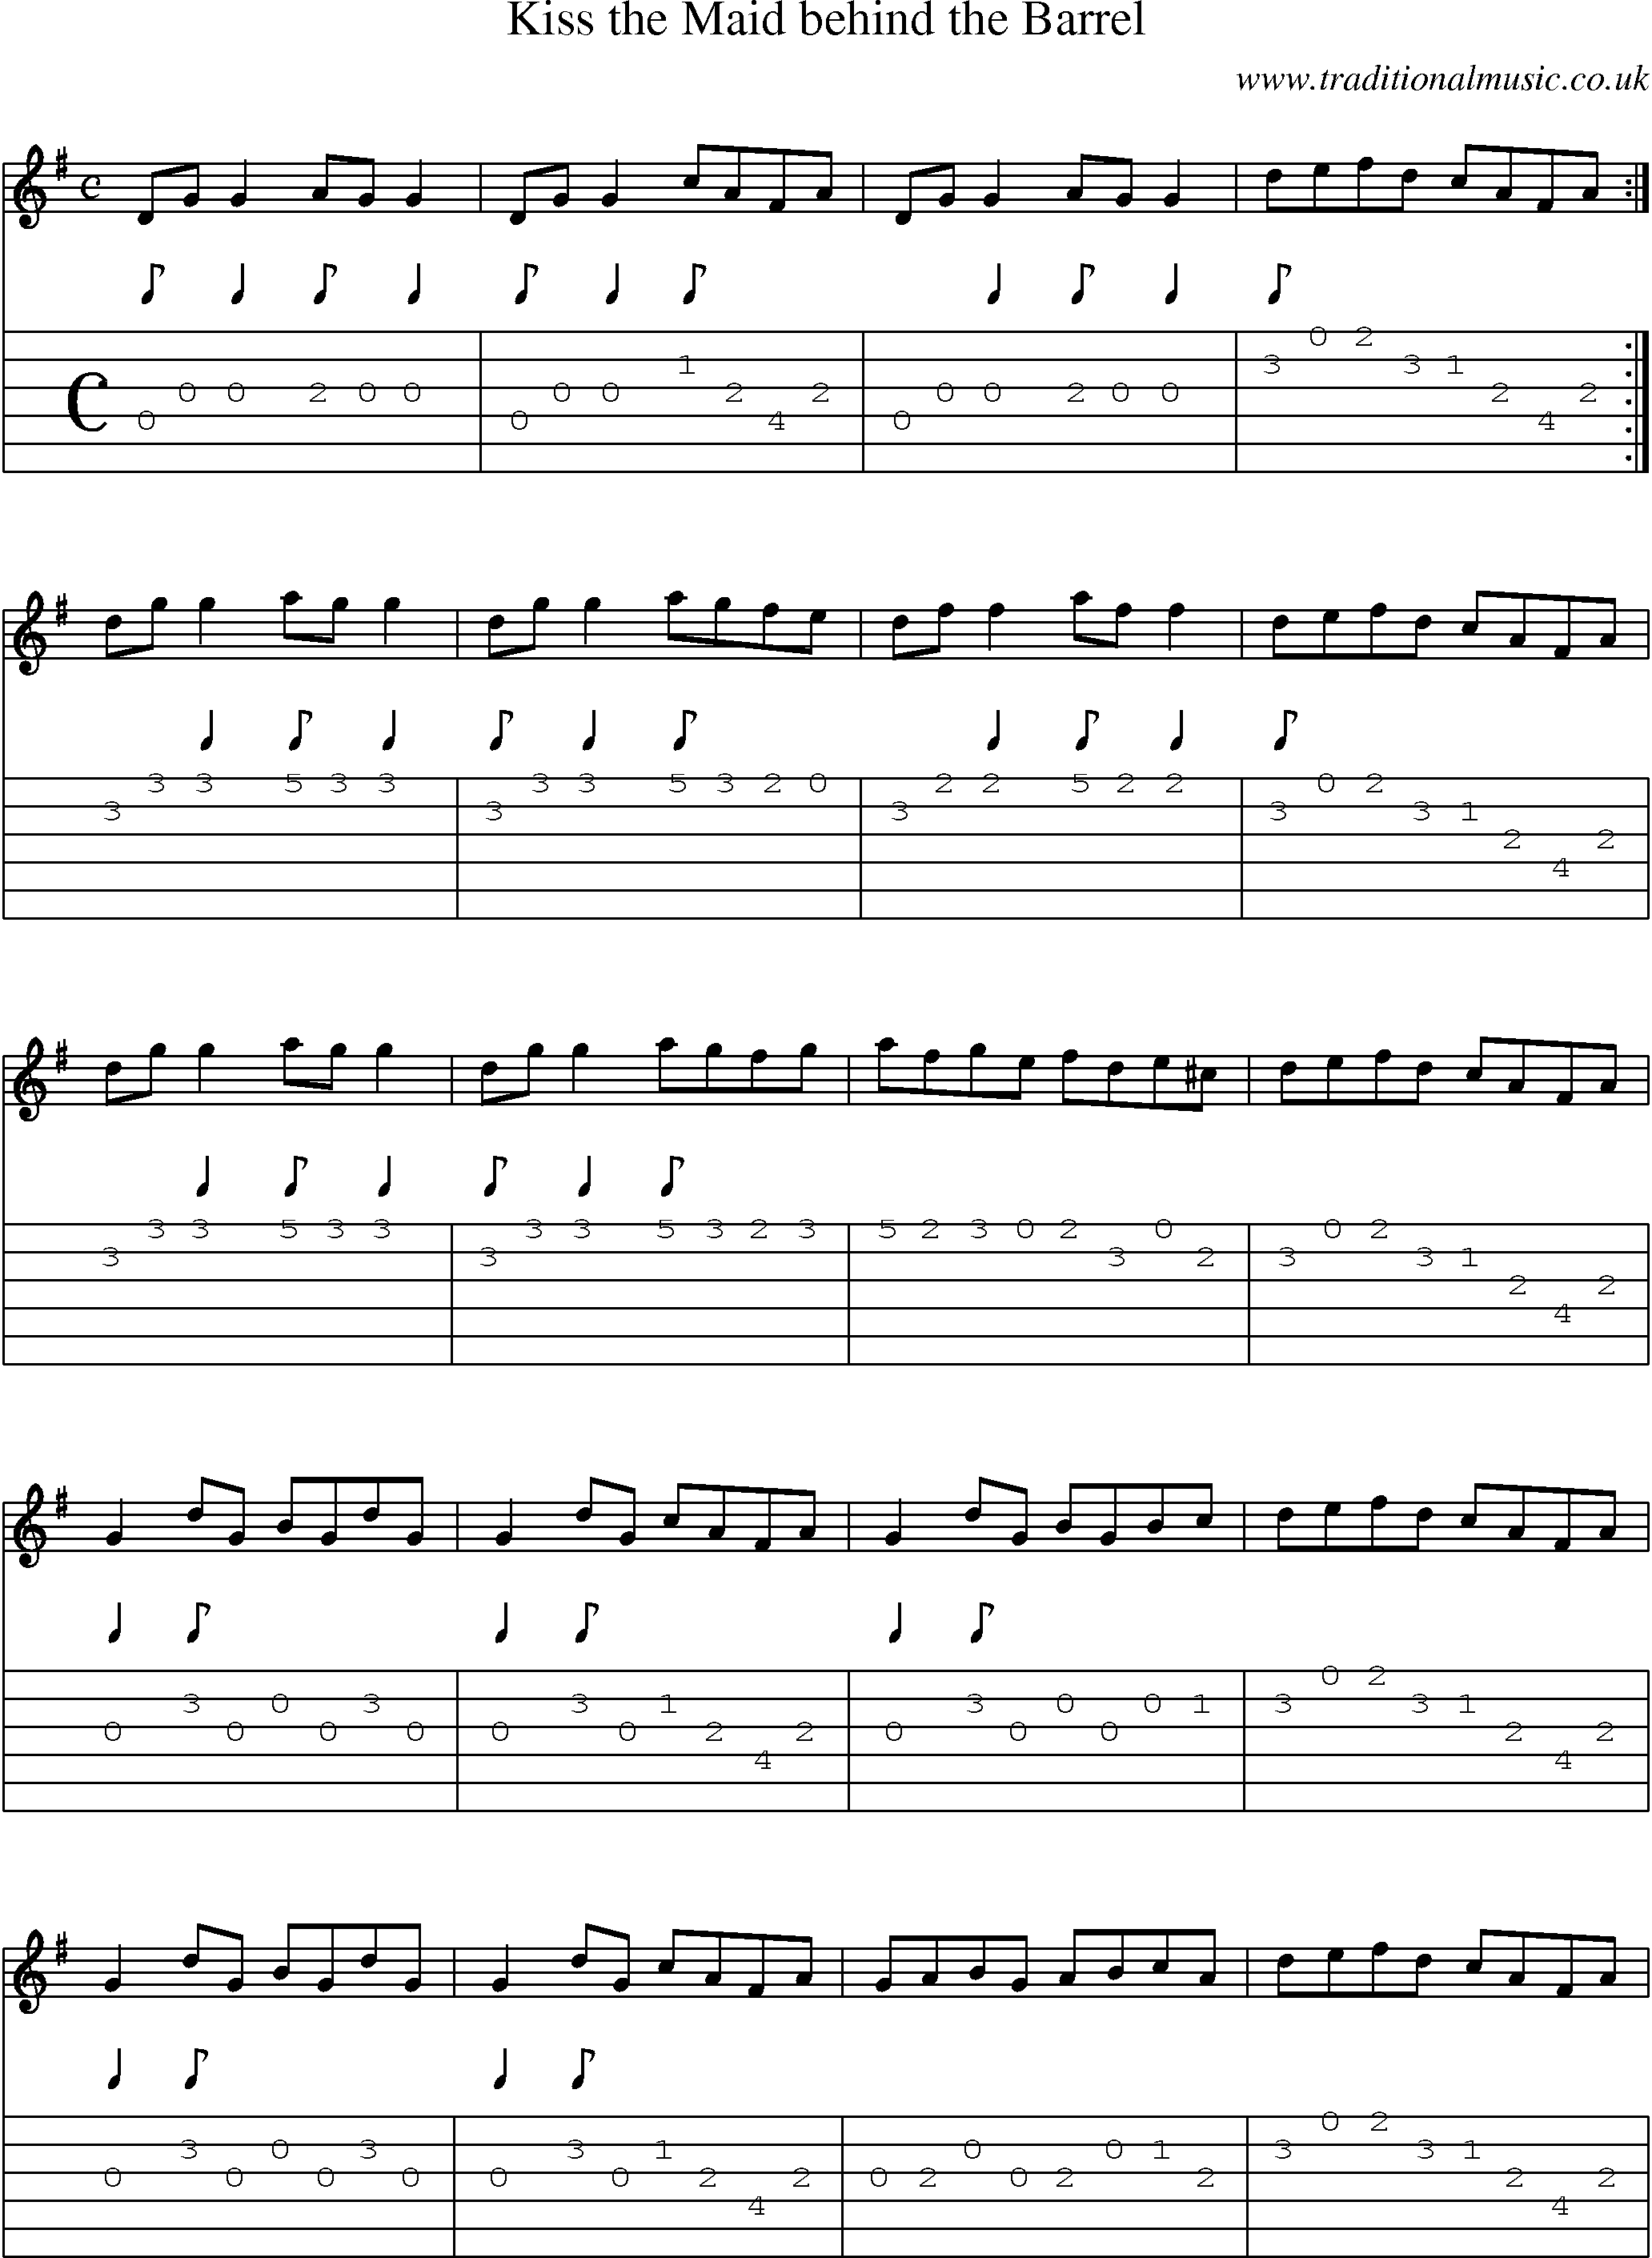 Music Score and Guitar Tabs for Kiss Maid Behind Barrel